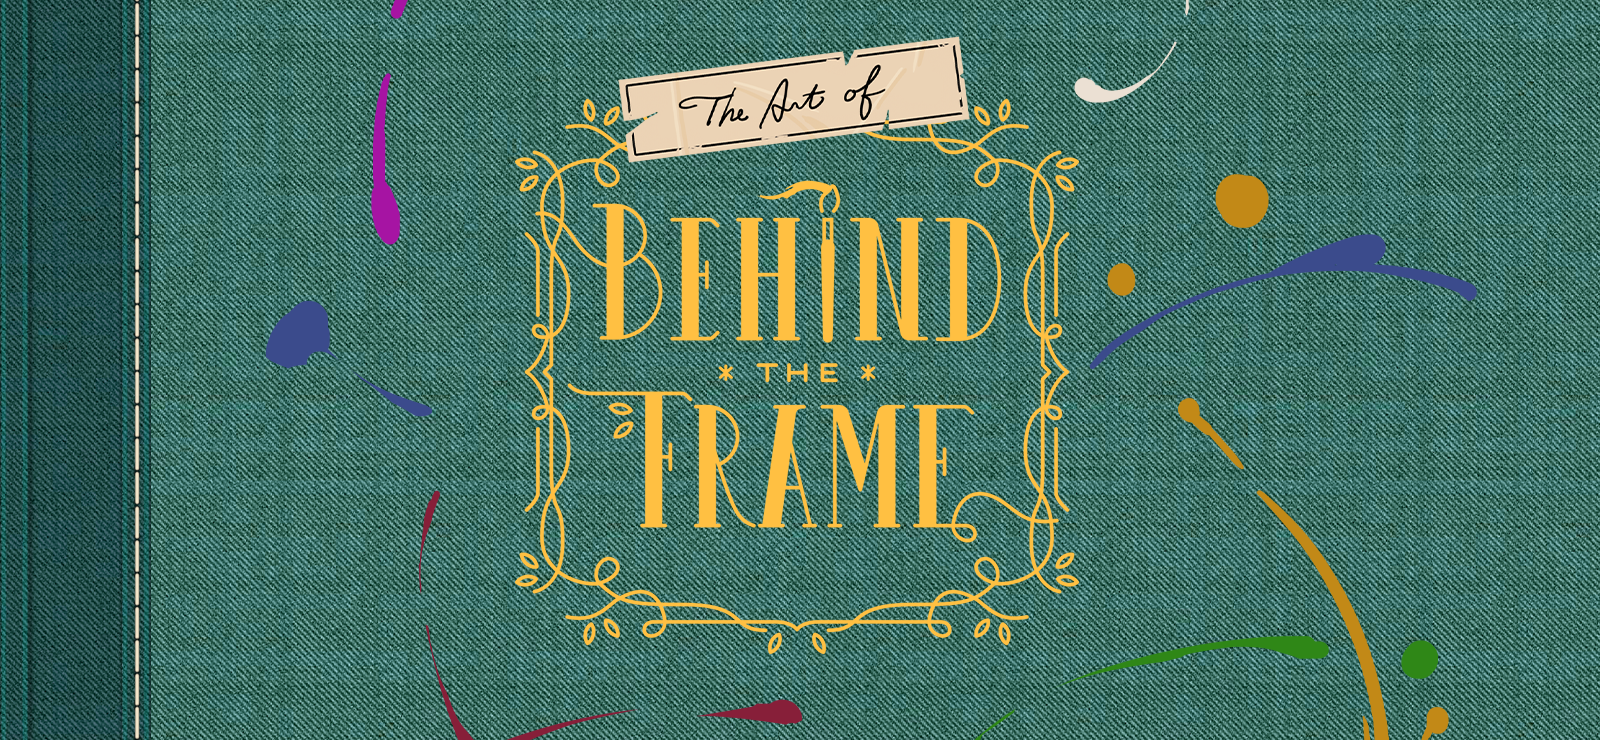 Behind The Frame: The Finest Scenery - Art Book